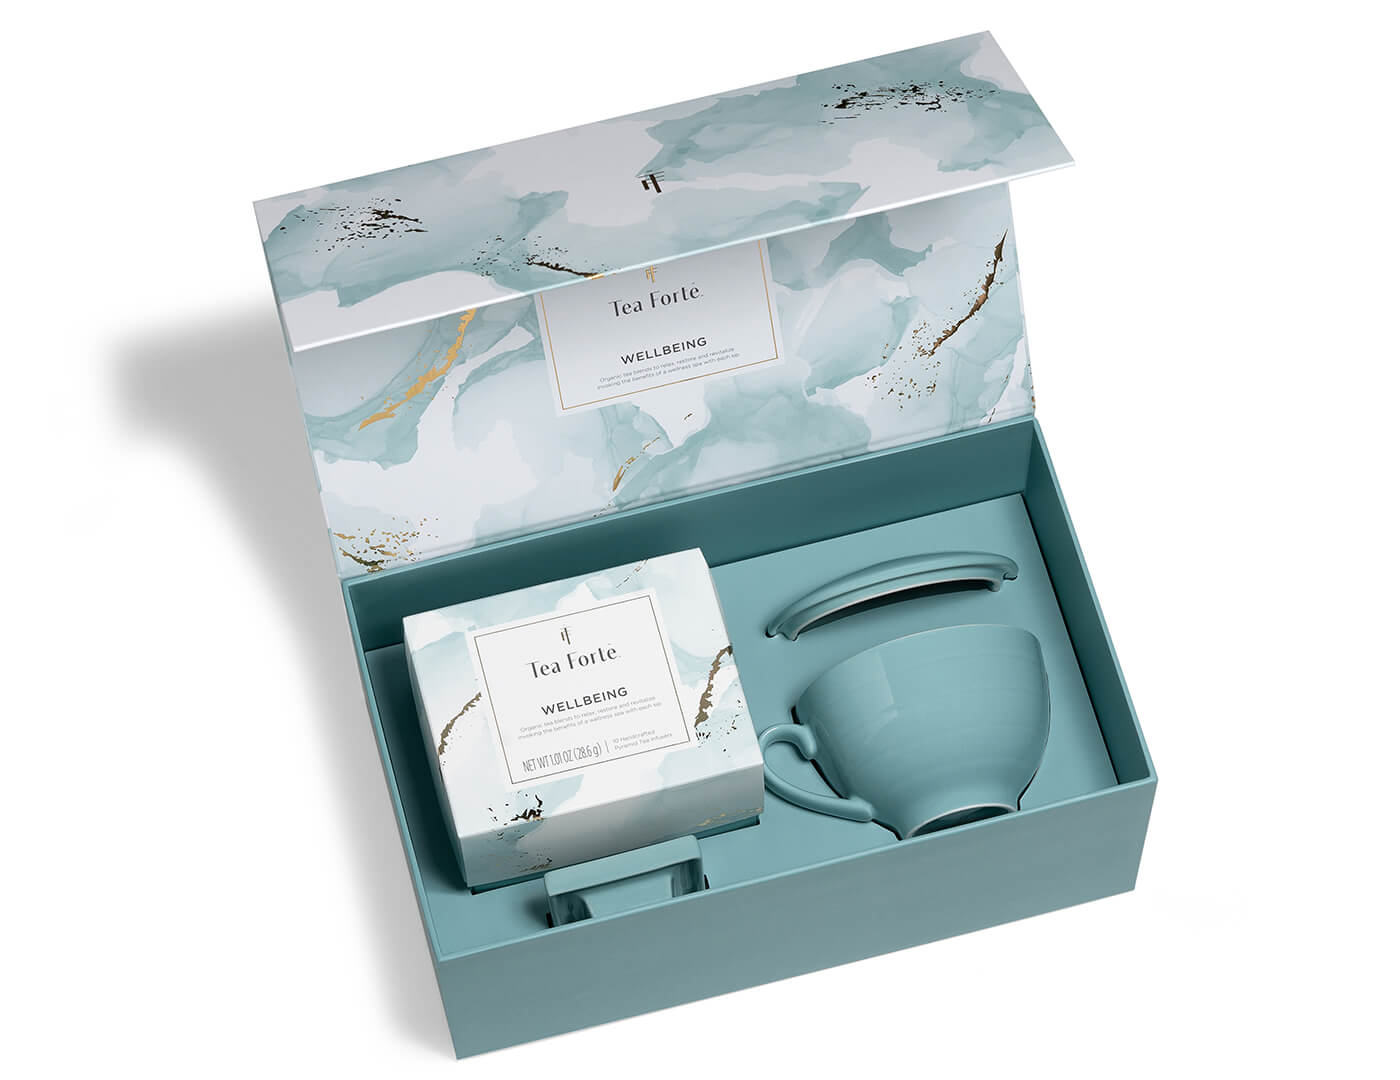 Wellbeing Gift Set, box open to reveal contents.